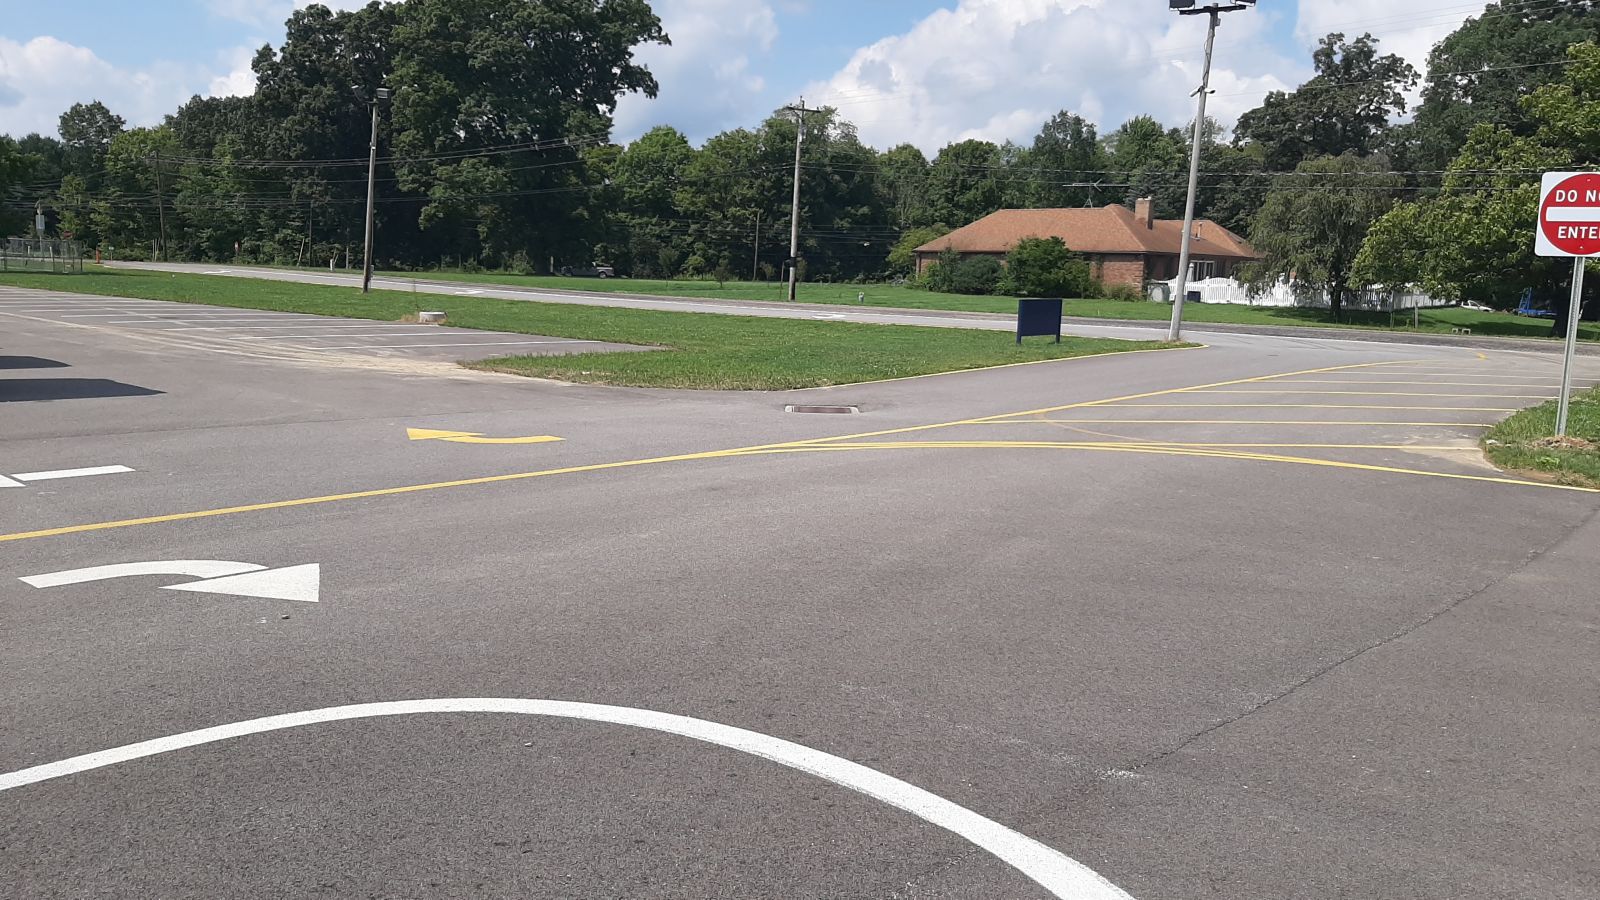 An image of the parking lot, signage, and painted lines on the blacktop.